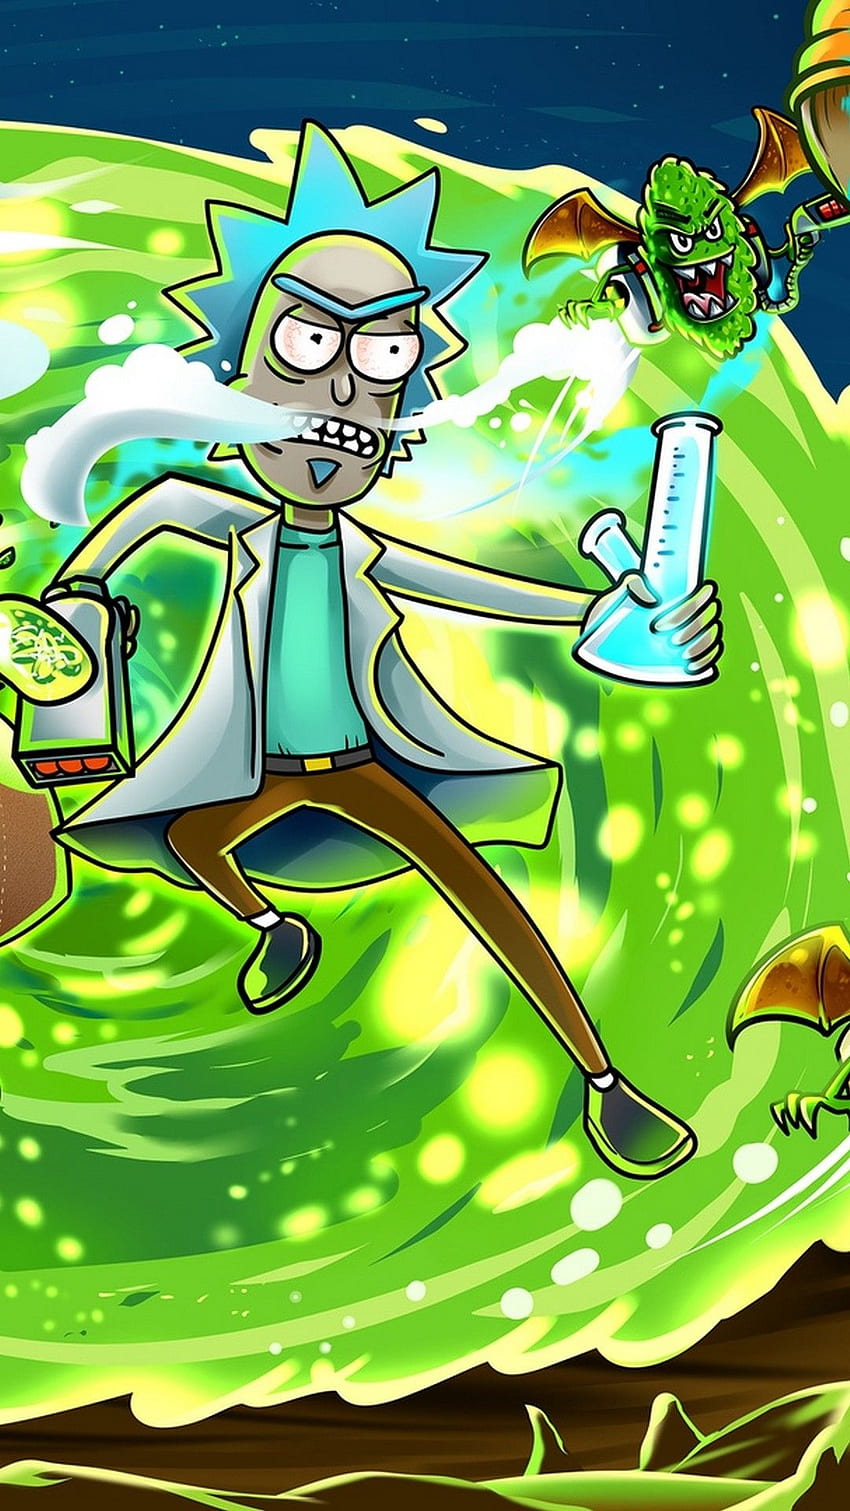 Rick and Morty Family Wallpaper iPhone Phone 4K #9400e